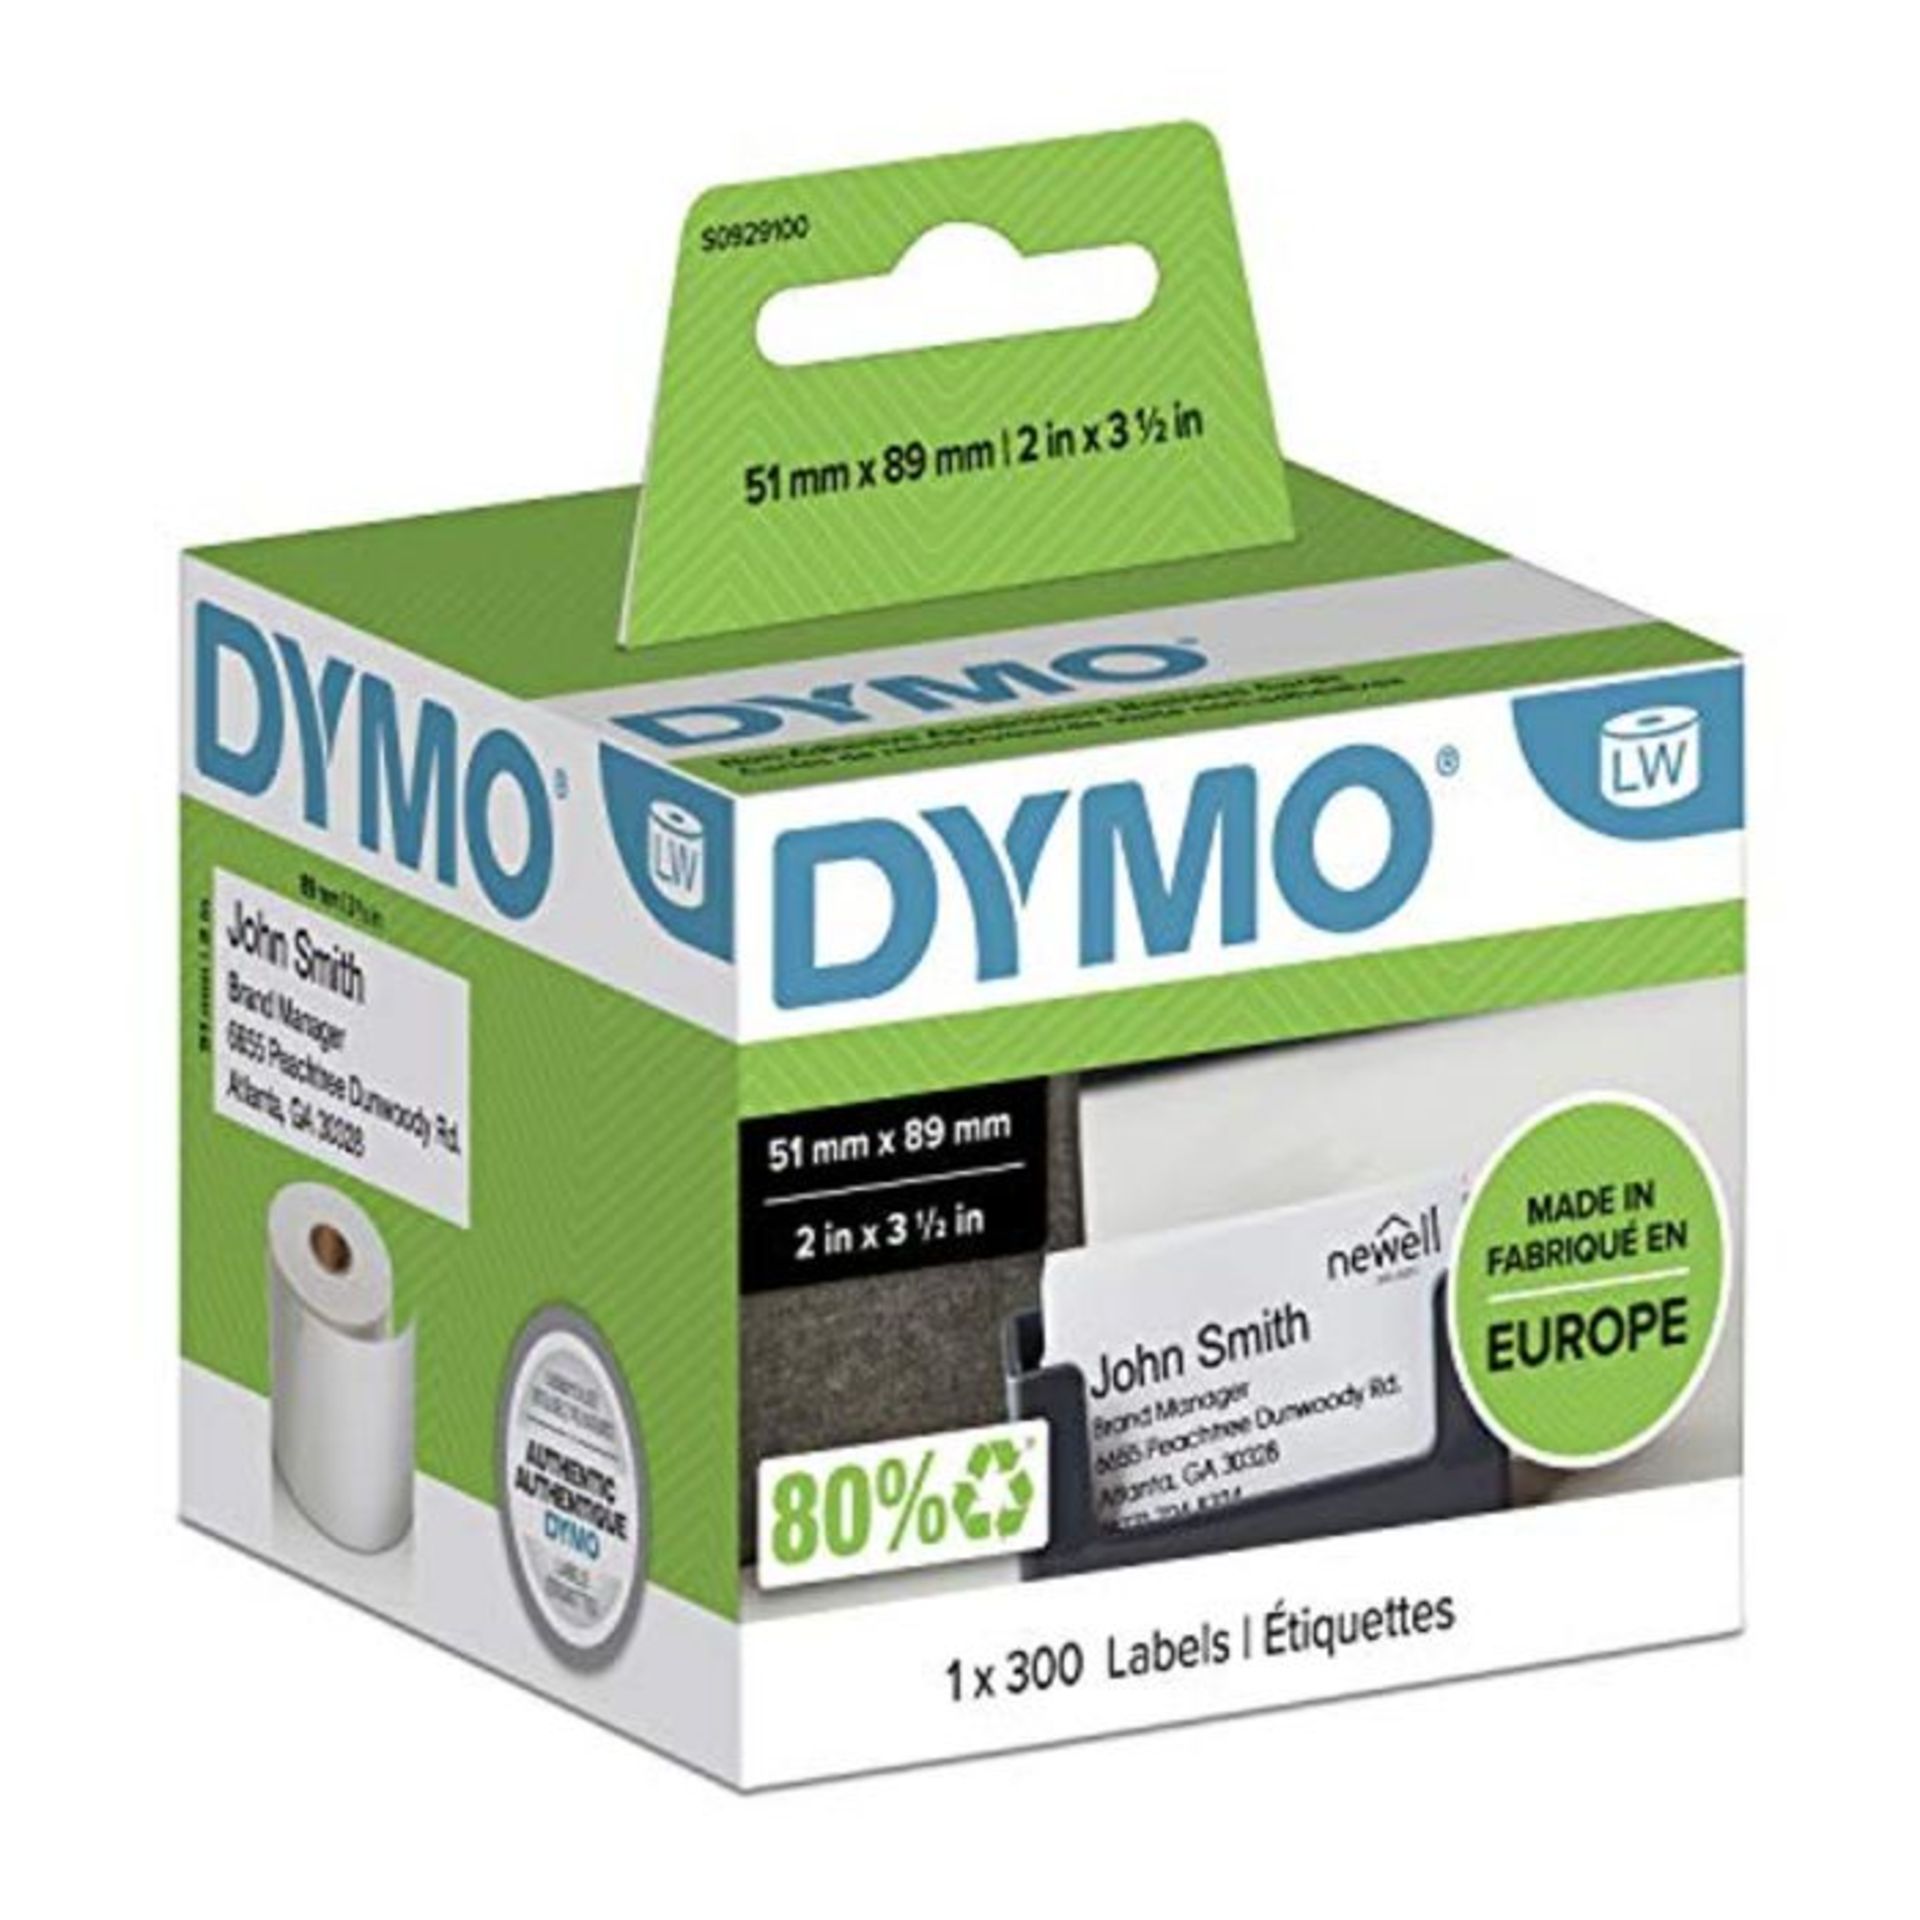 Dymo LW Name Badge Cards, Non Adhesive, 51mm x 89mm, Roll of 300, Black Print on White